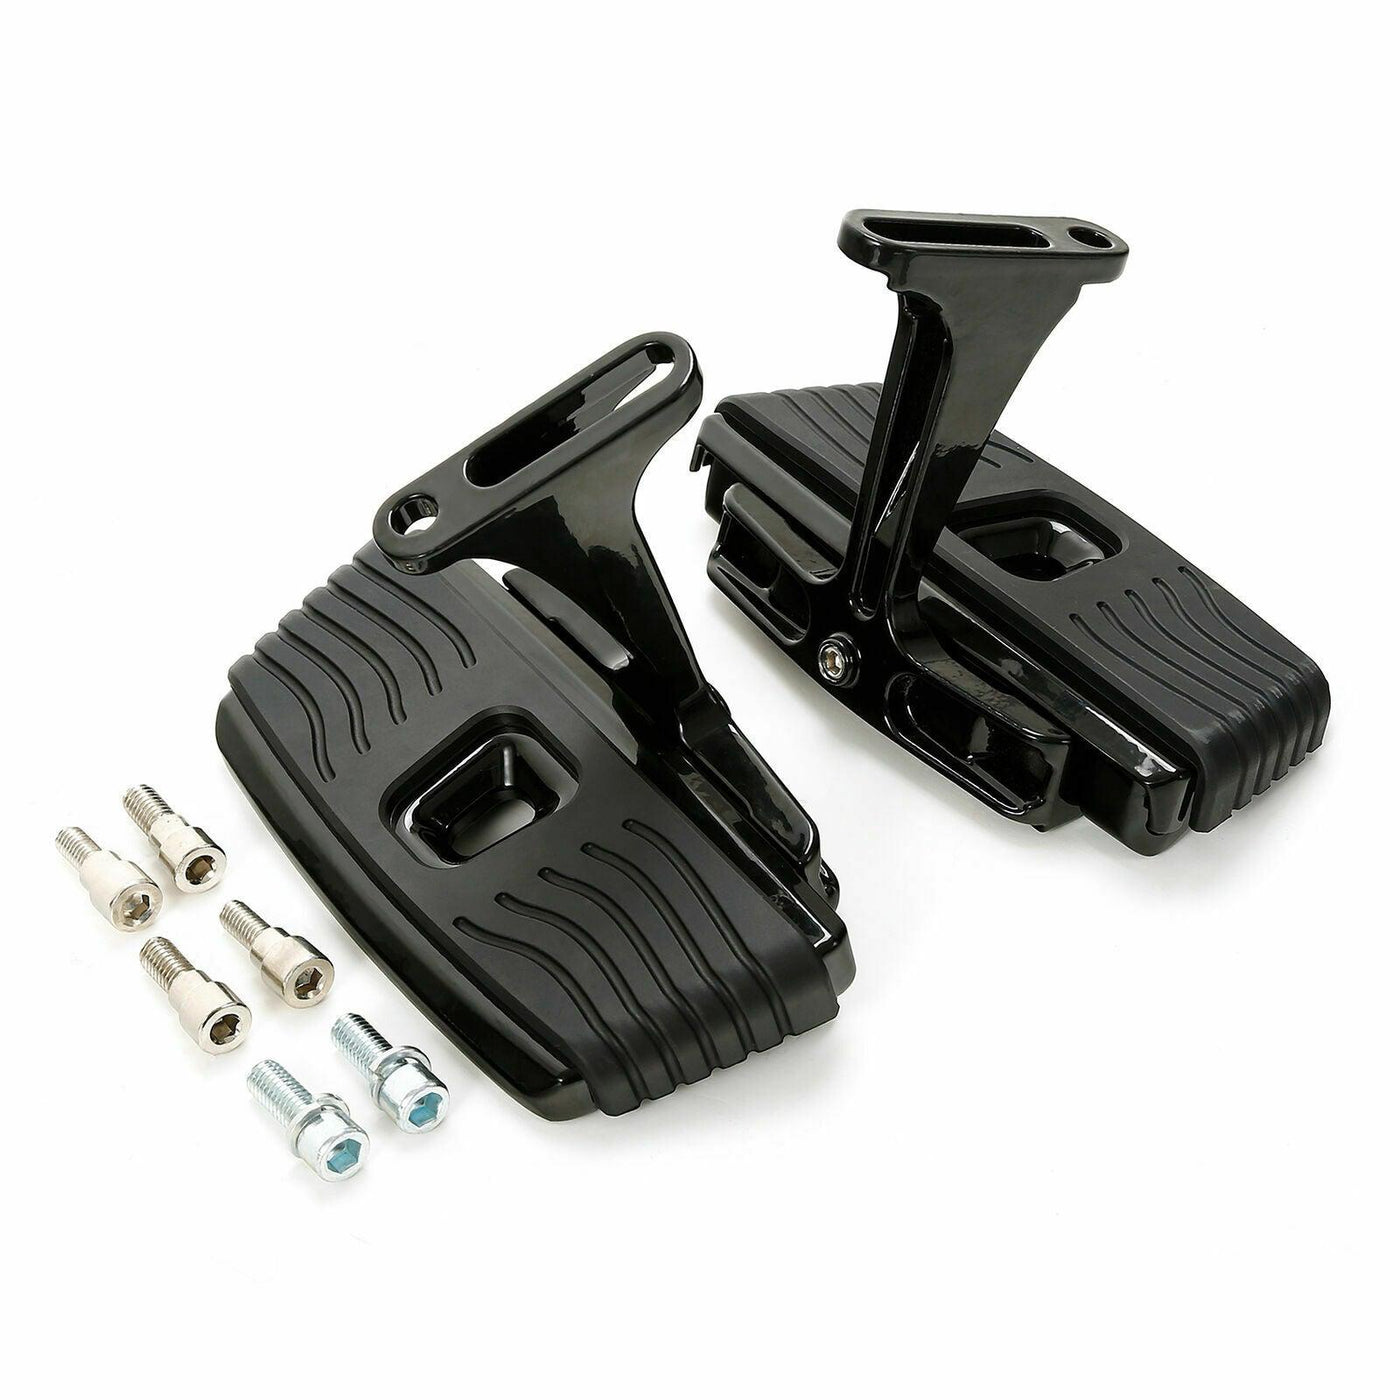 Driver Passenger Floorboard Fit For Harley Touring Road Glide Street Glide 93-22 - Moto Life Products